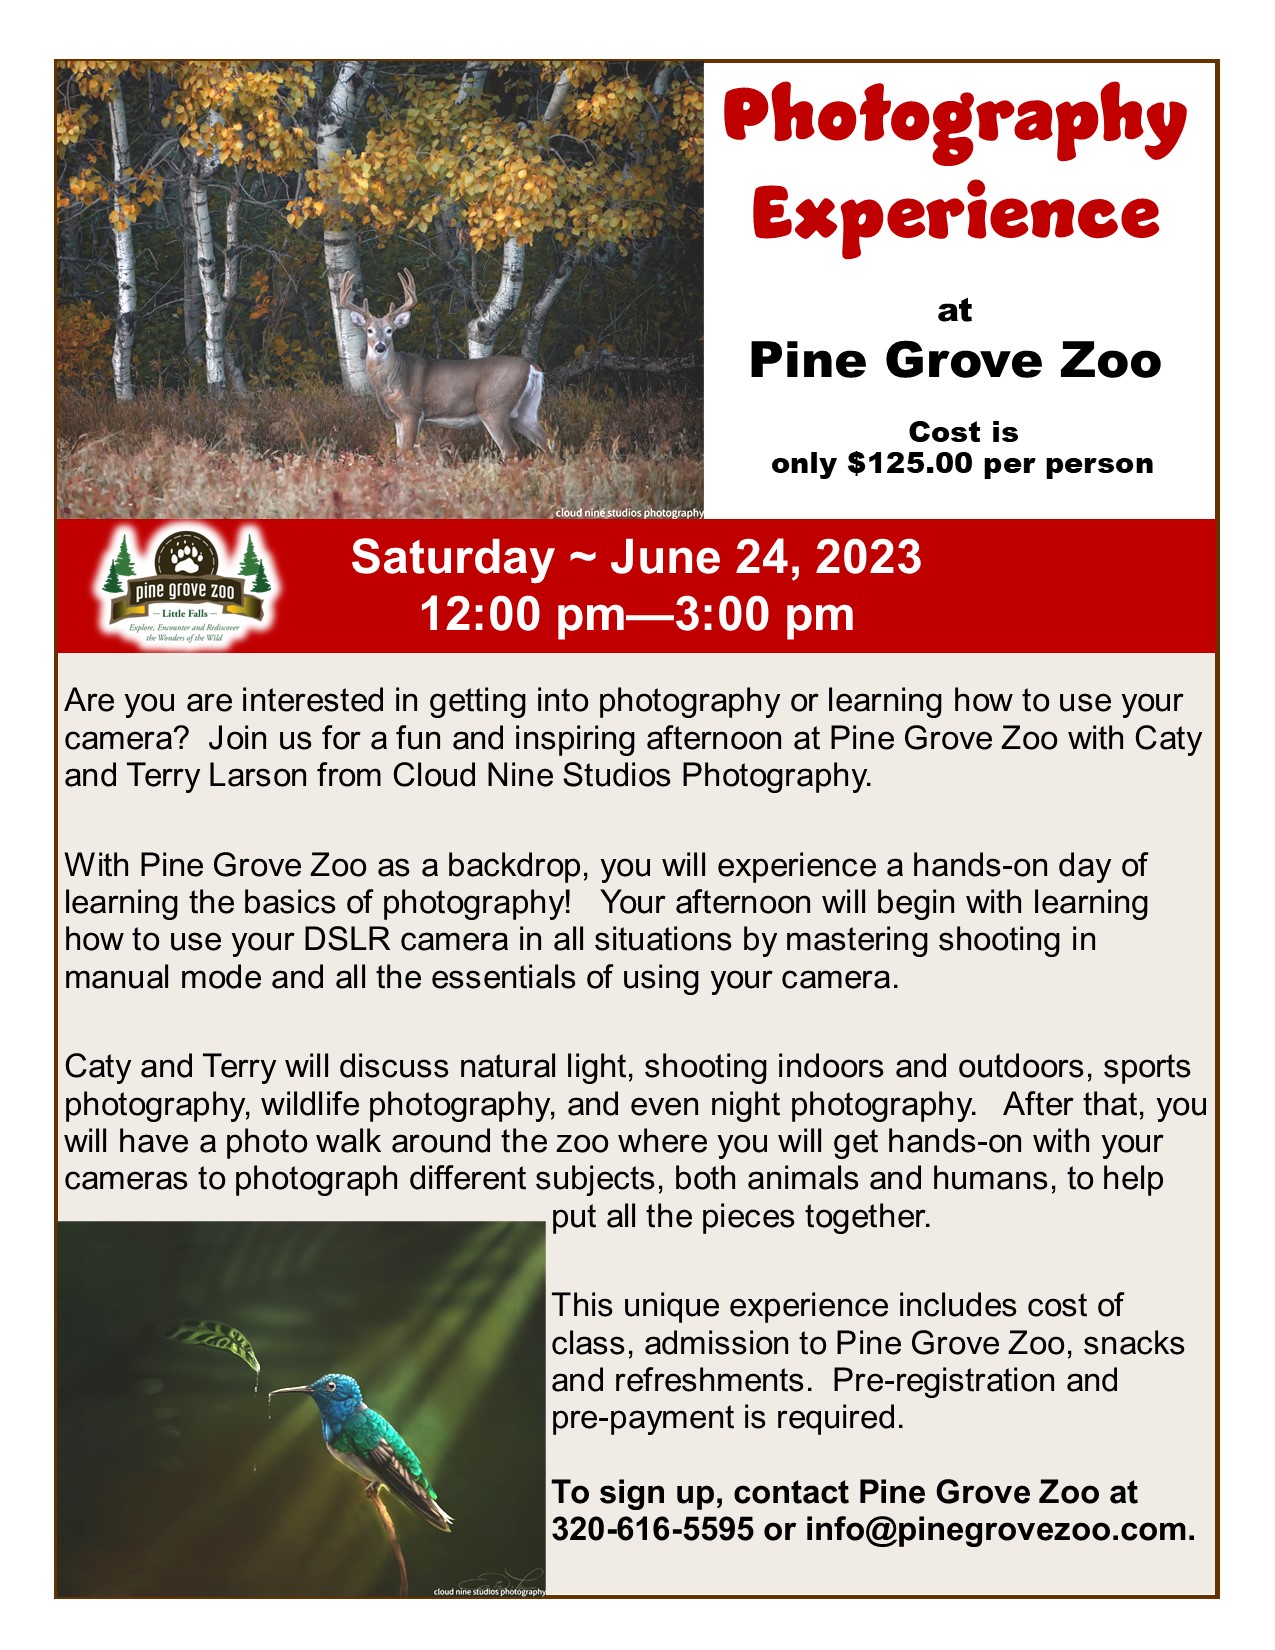 Photography Class and Experience